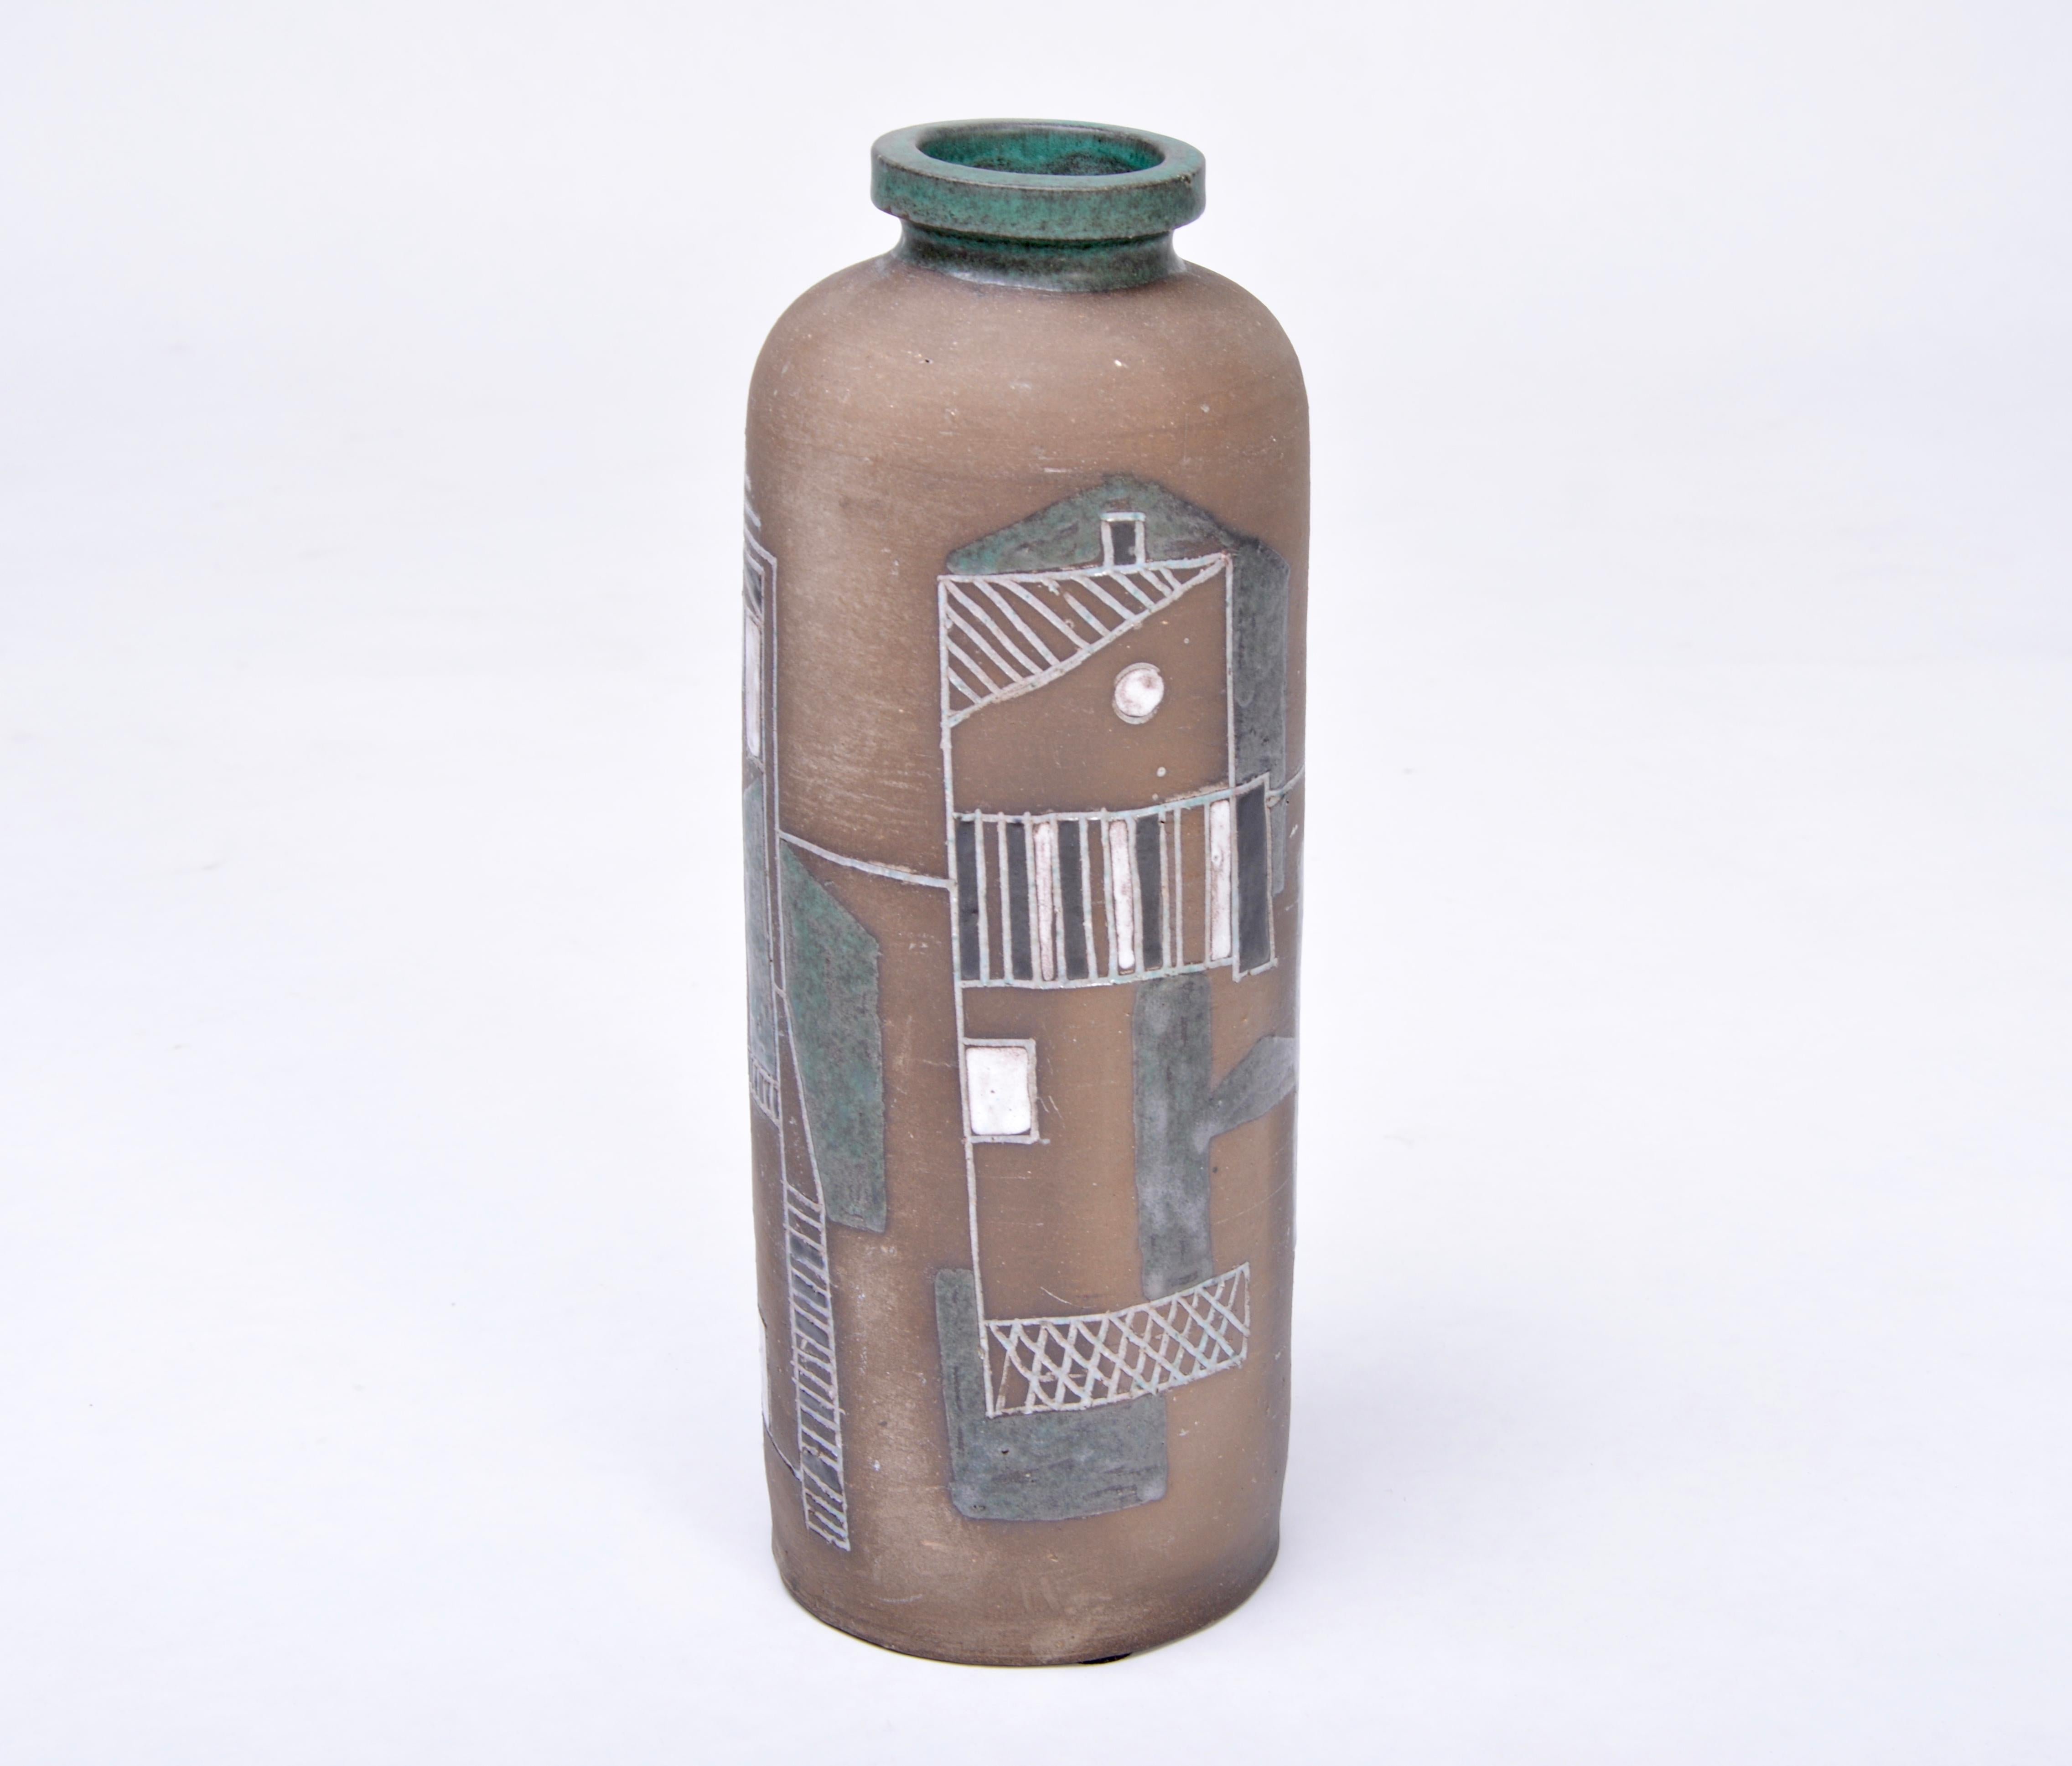 Brown Mid-Century Modern Stoneware vase with abstract graphic decor, 1960s
Midcentury vase made from stoneware with beautiful abstract graphic decor and ceramic glazing.